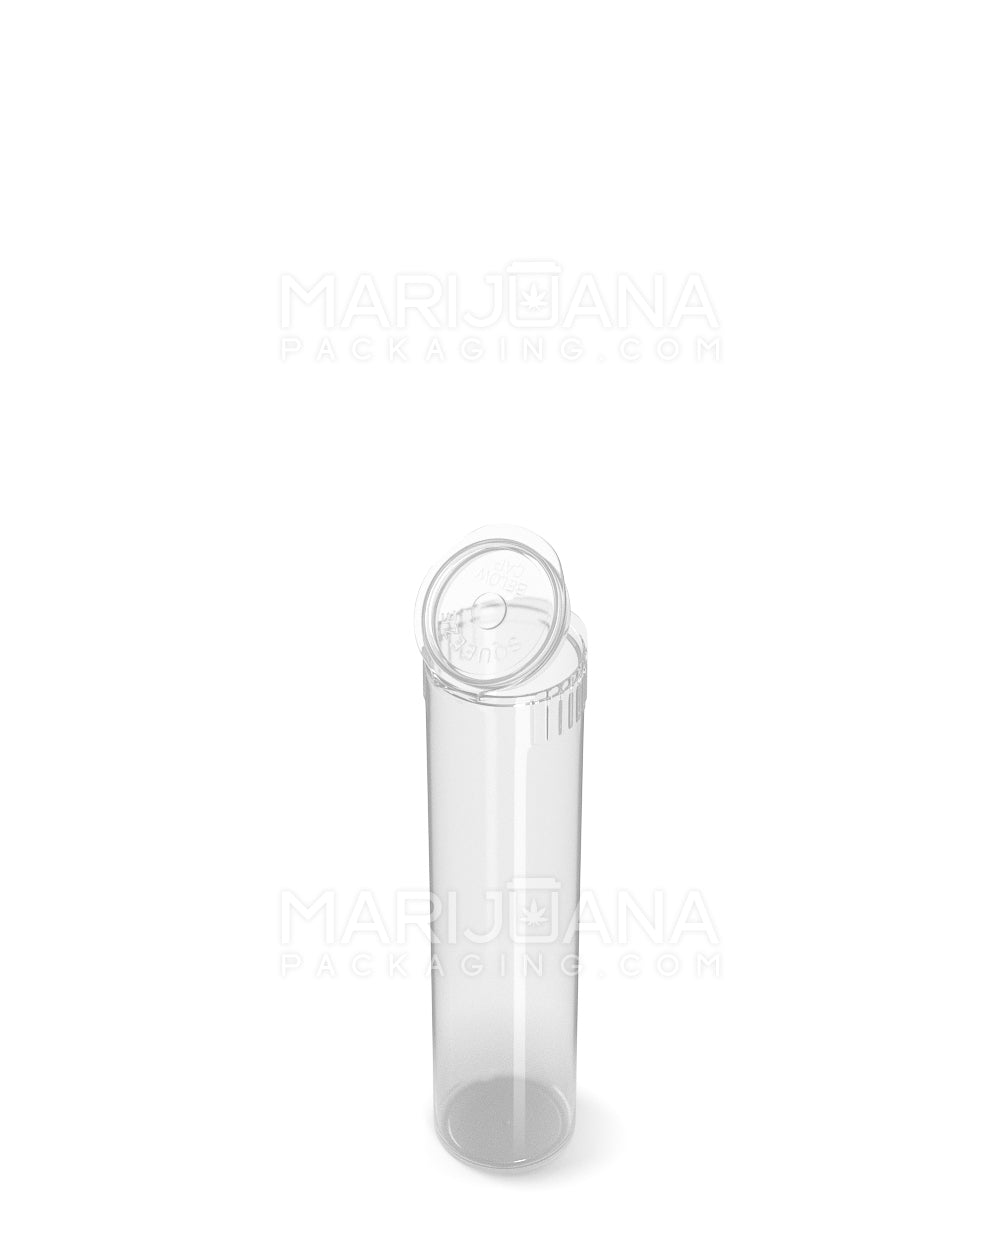 Child Resistant | Pop Top Plastic Pre-Roll Tubes | 78mm - Clear - 1200 Count - 4